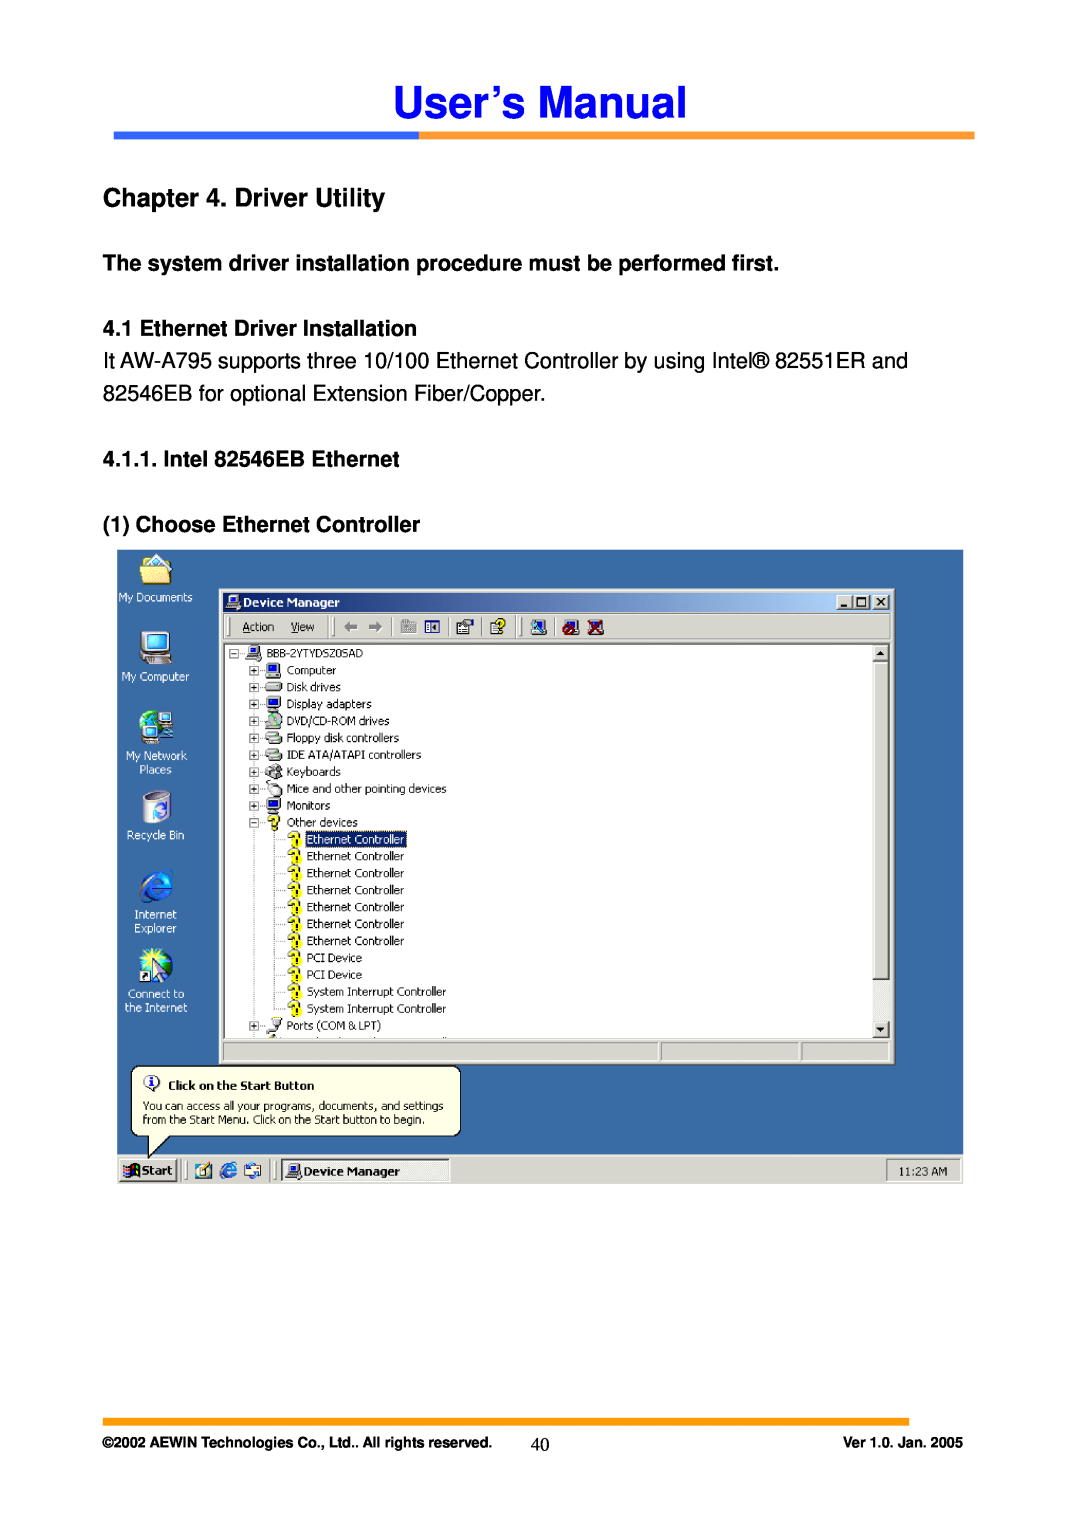 Intel AW-A795 user manual Driver Utility, The system driver installation procedure must be performed first, User’s Manual 